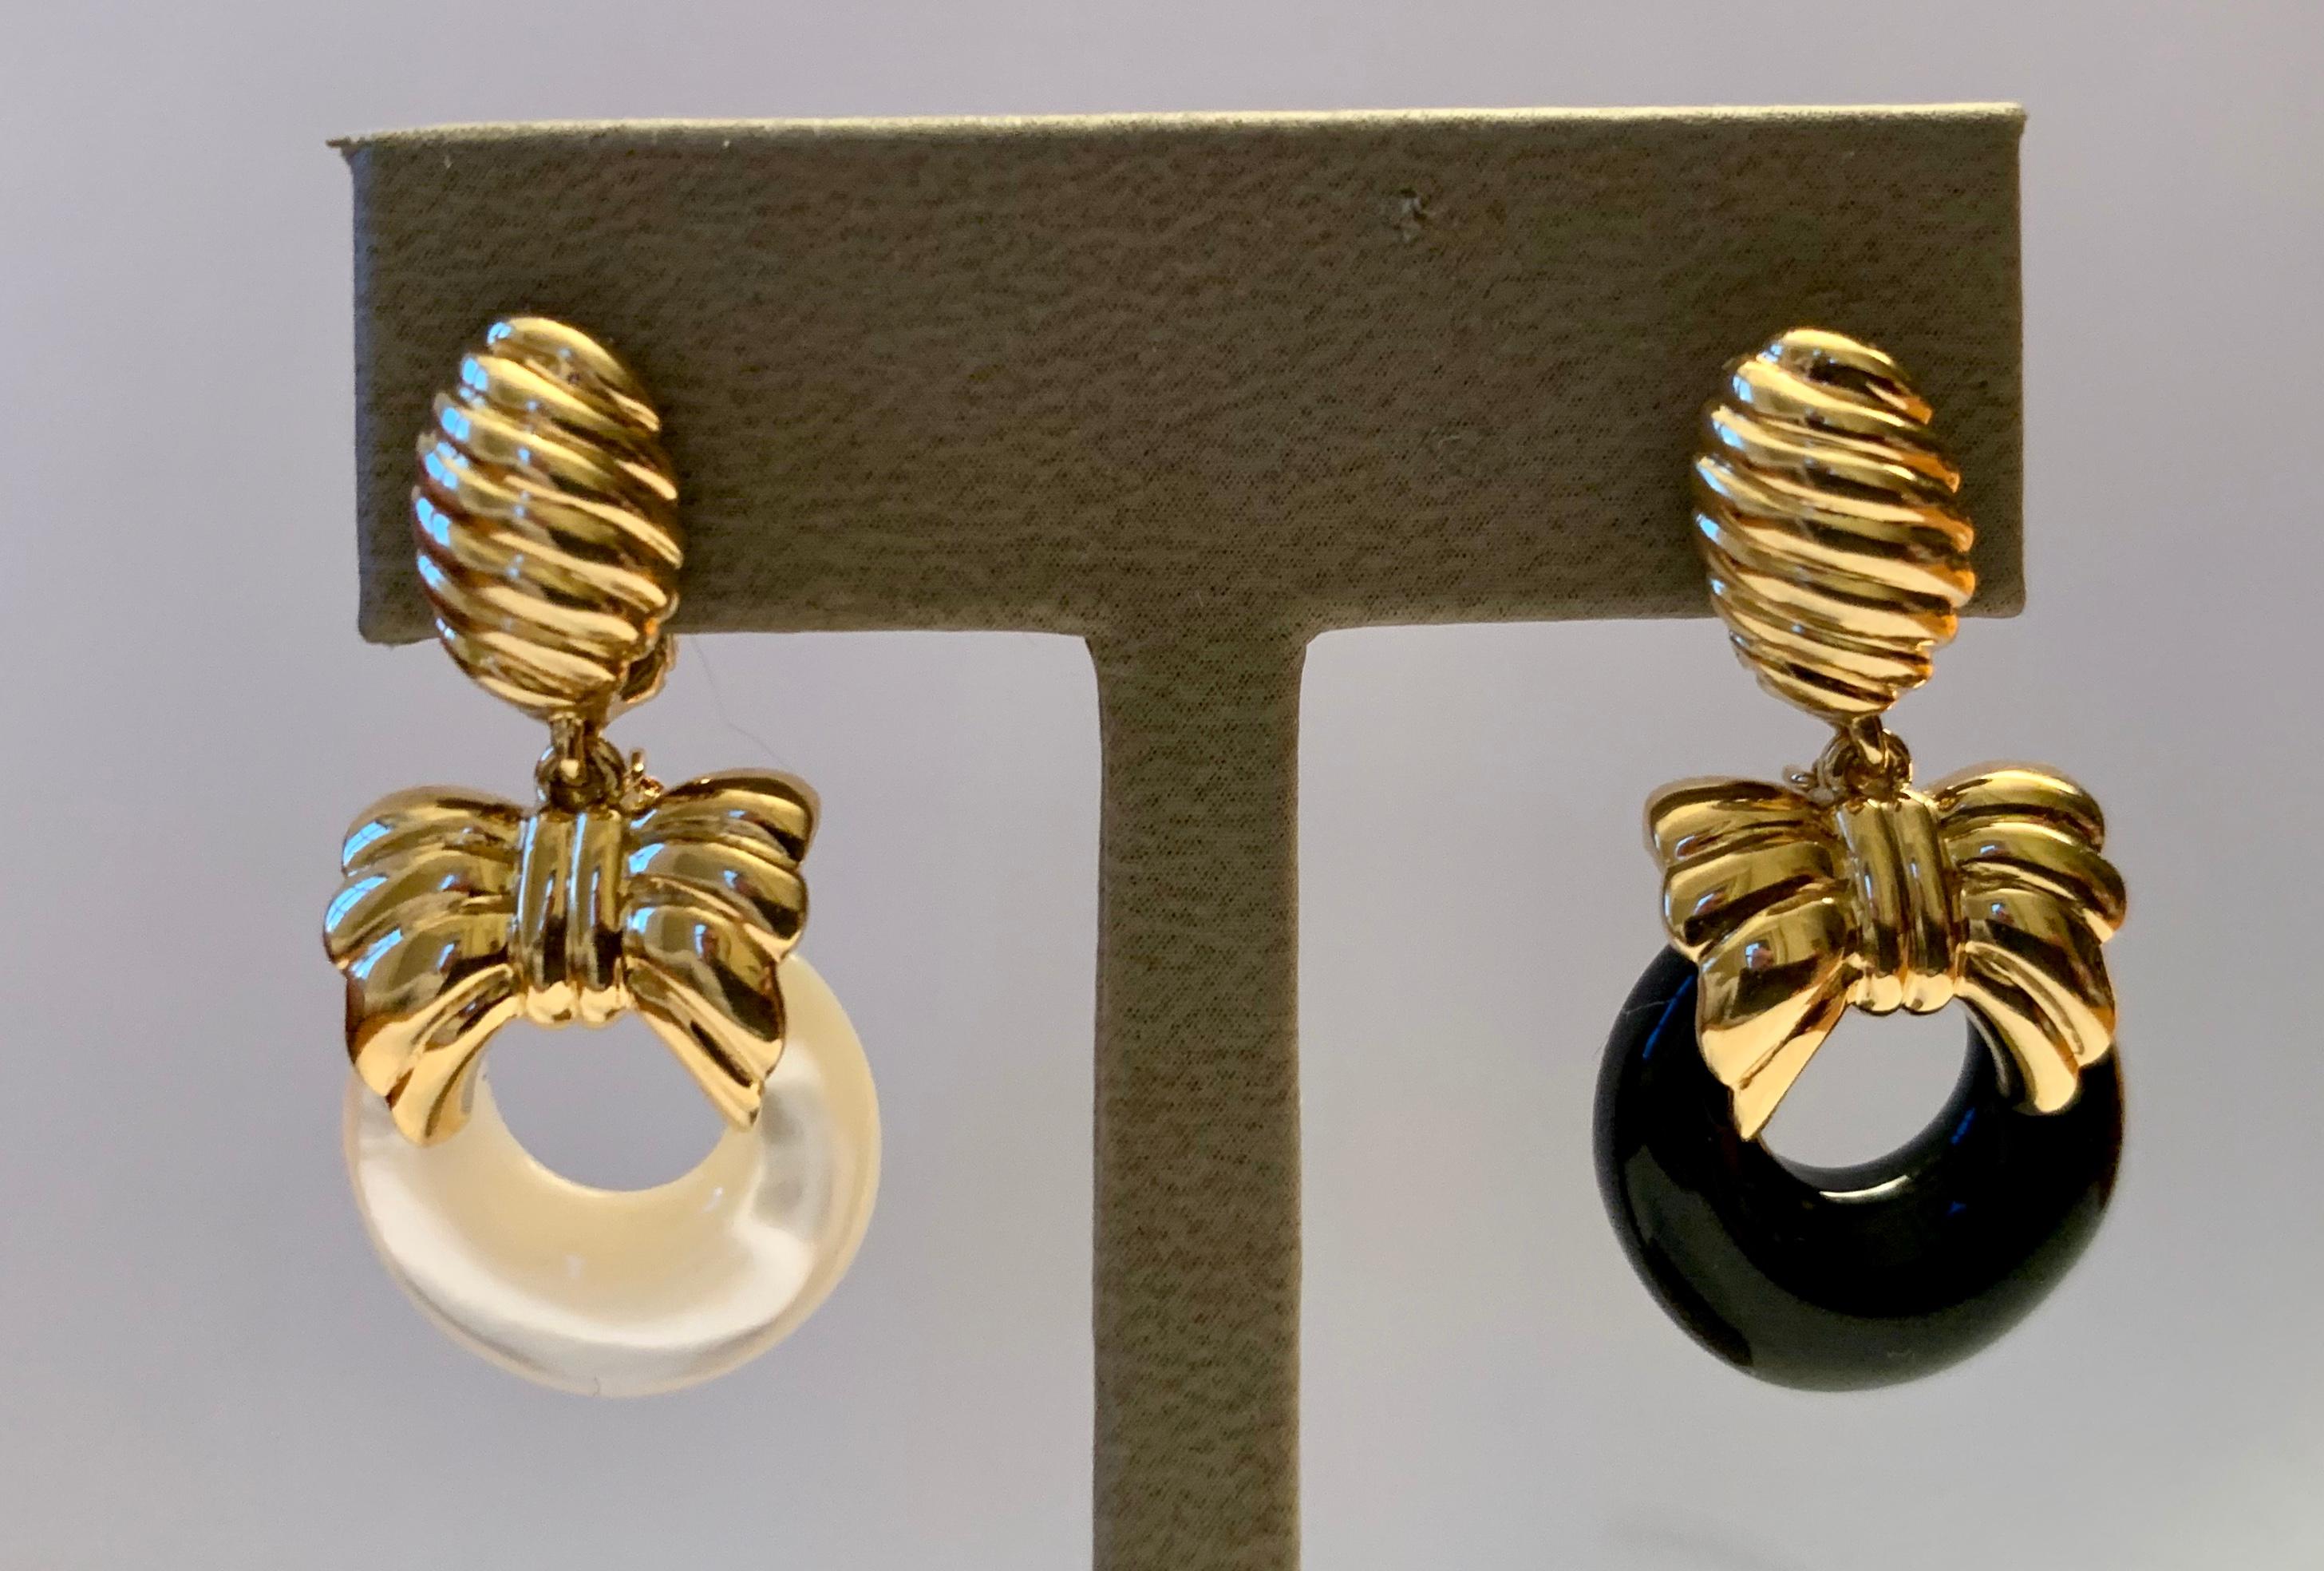 An intelligent and timeless chameleon design from Van Cleef & Arpels that features interchangeable door knocker earrings in 18 K yellow Gold with bow tie motives. Featuring hoops of  black onyx, ebony (wood) and mother of pearl.Signed VCA and